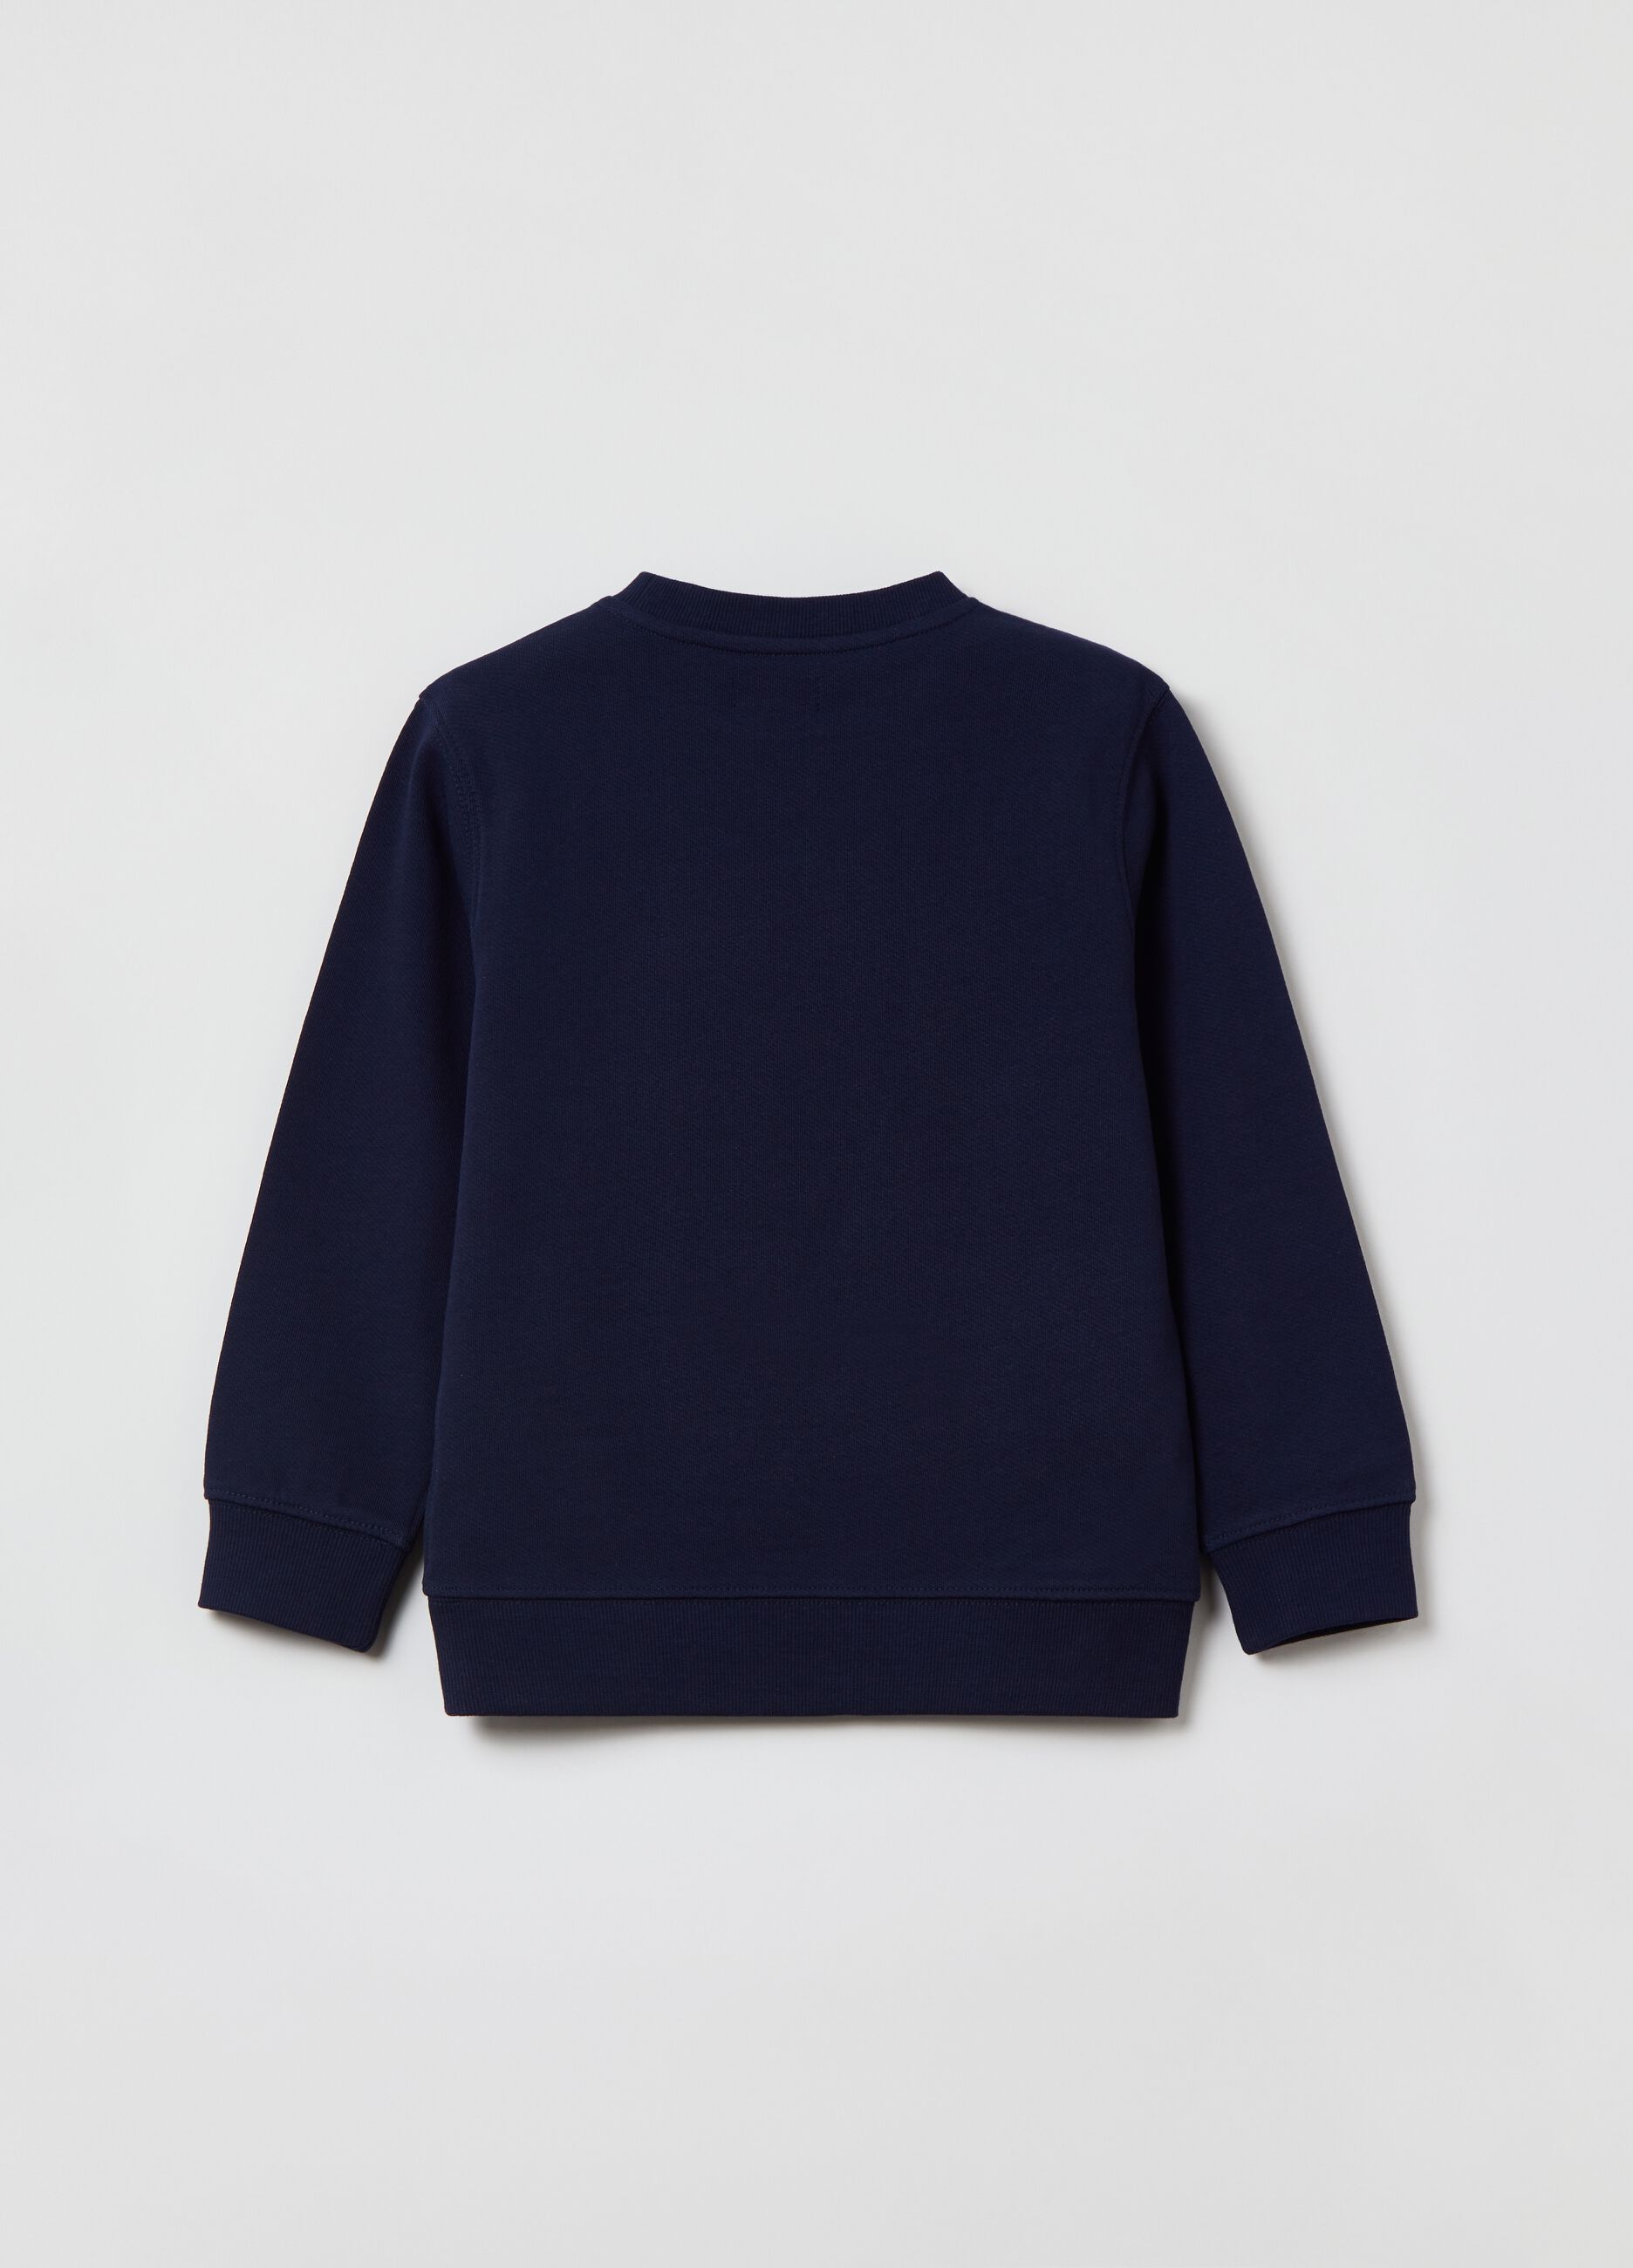 Sweatshirt with round neck and detail